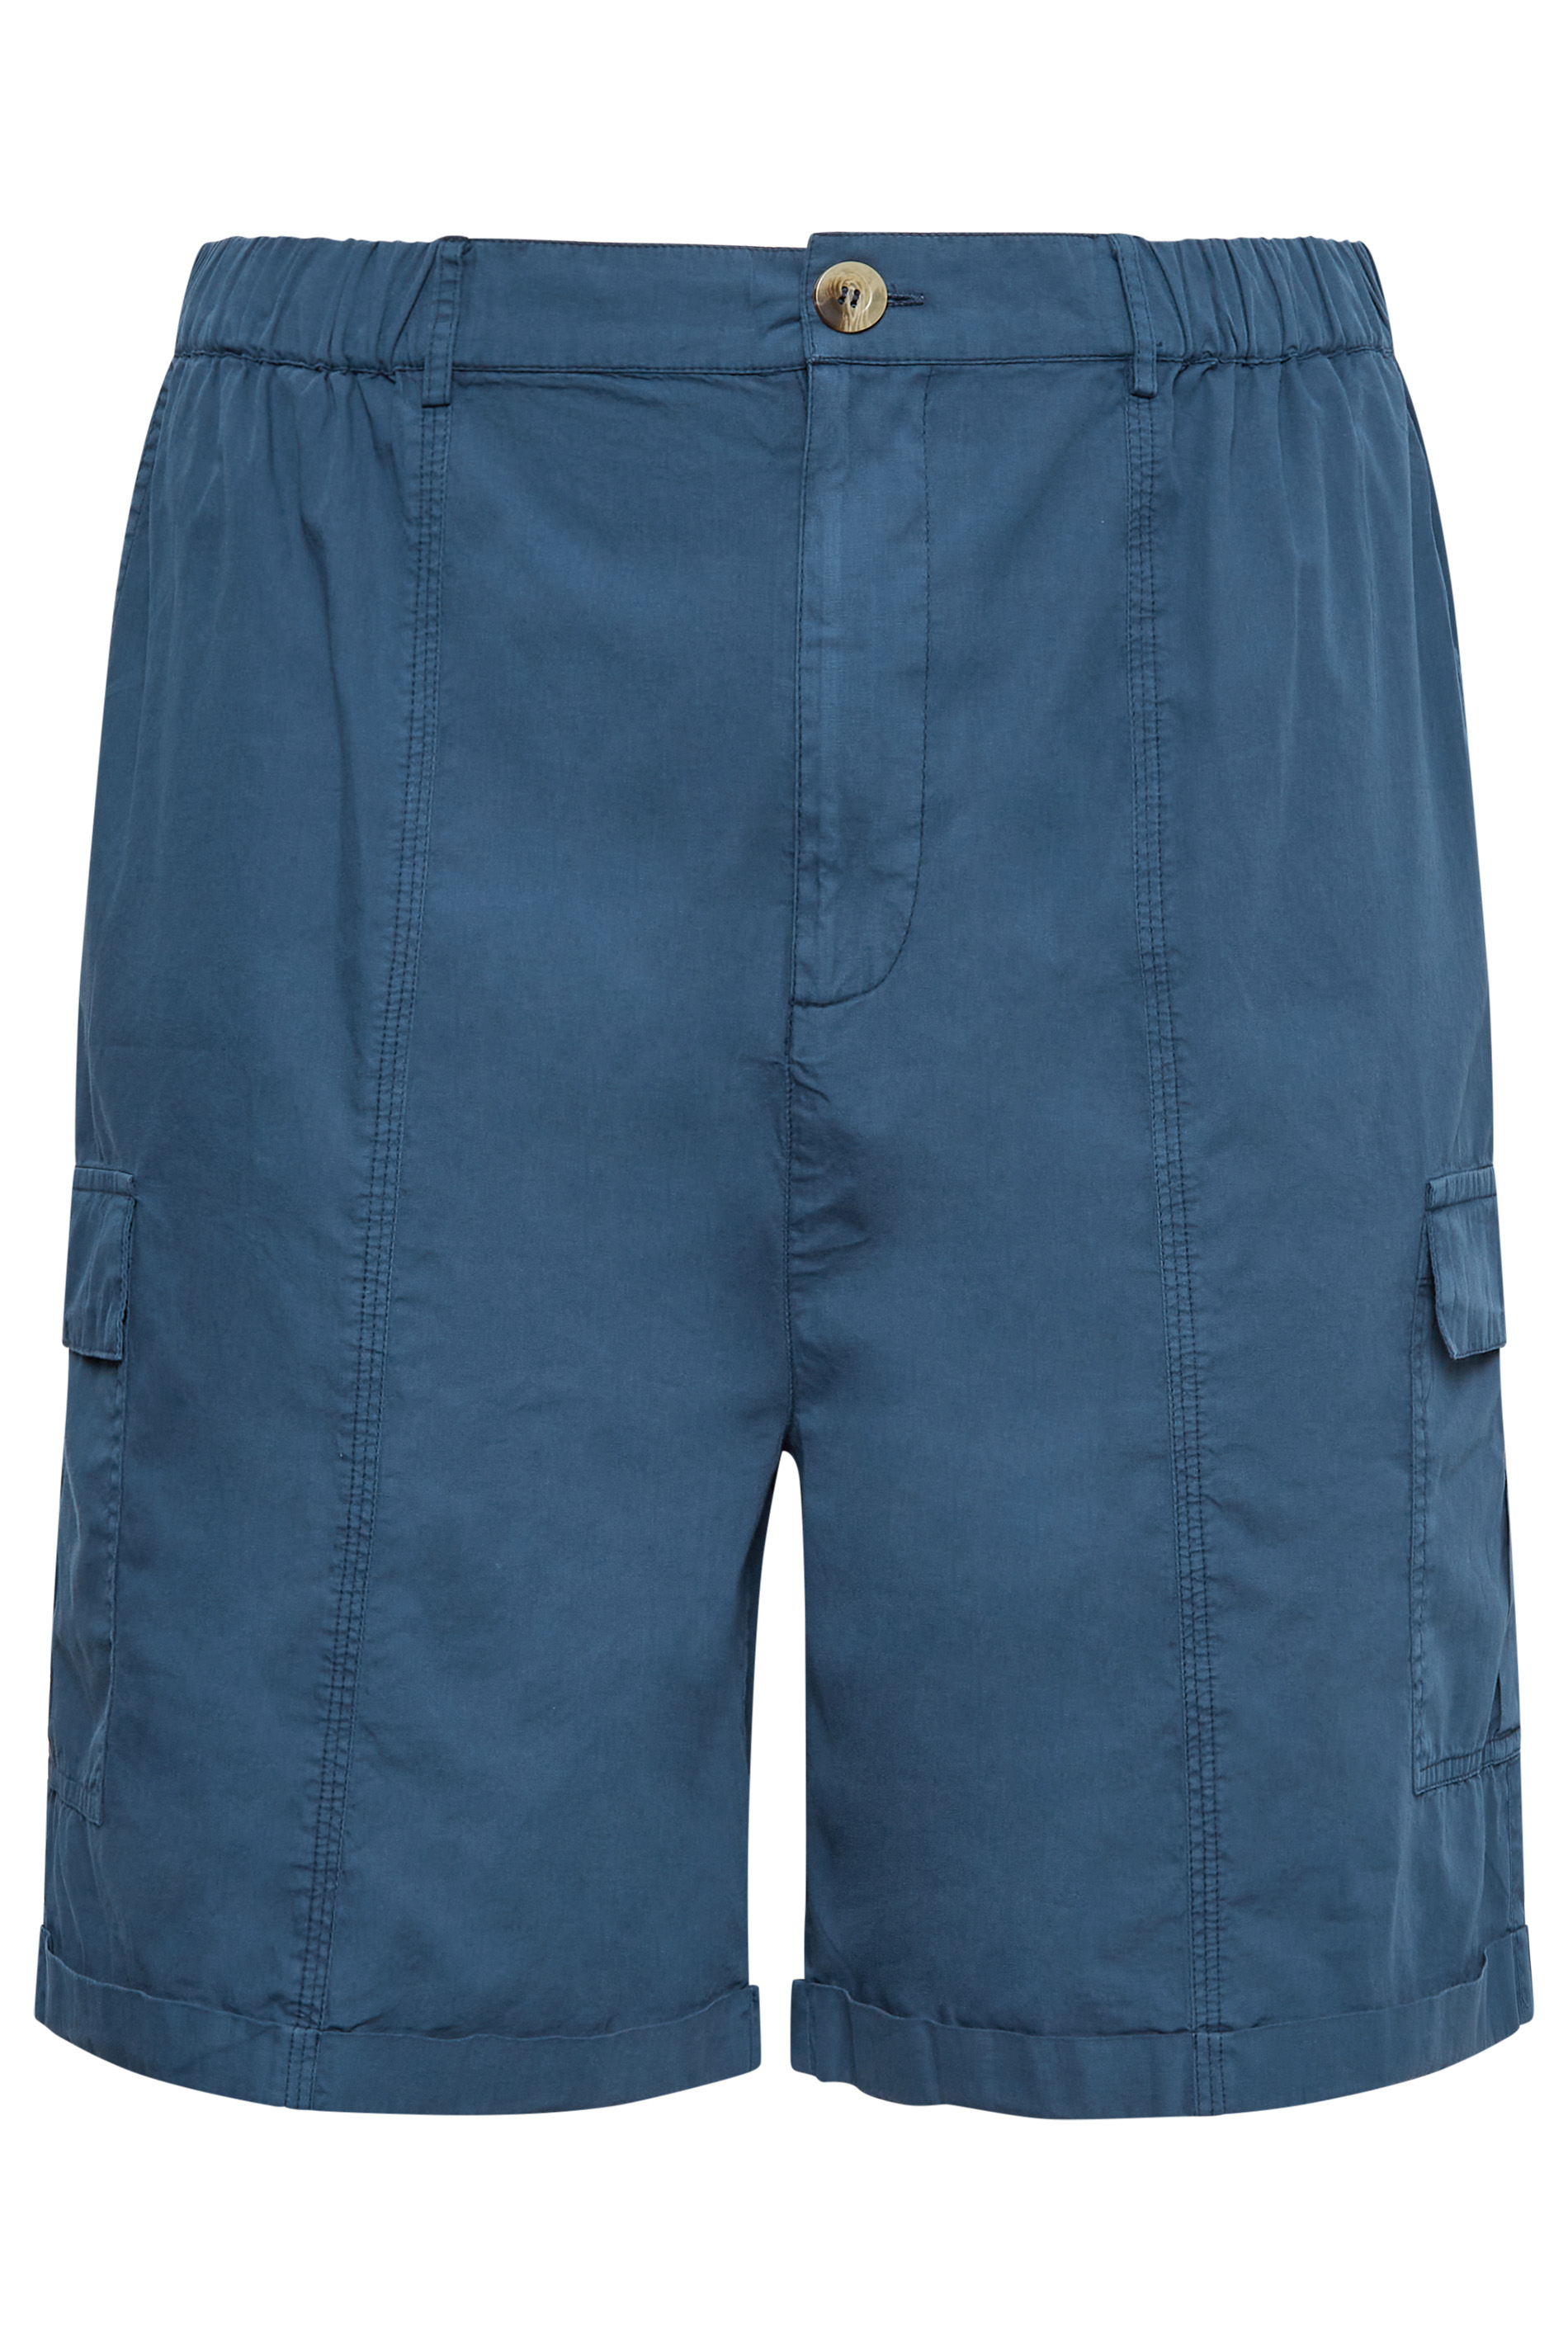 YOURS Curve Plus Size Navy Blue Cargo Shorts | Yours Clothing